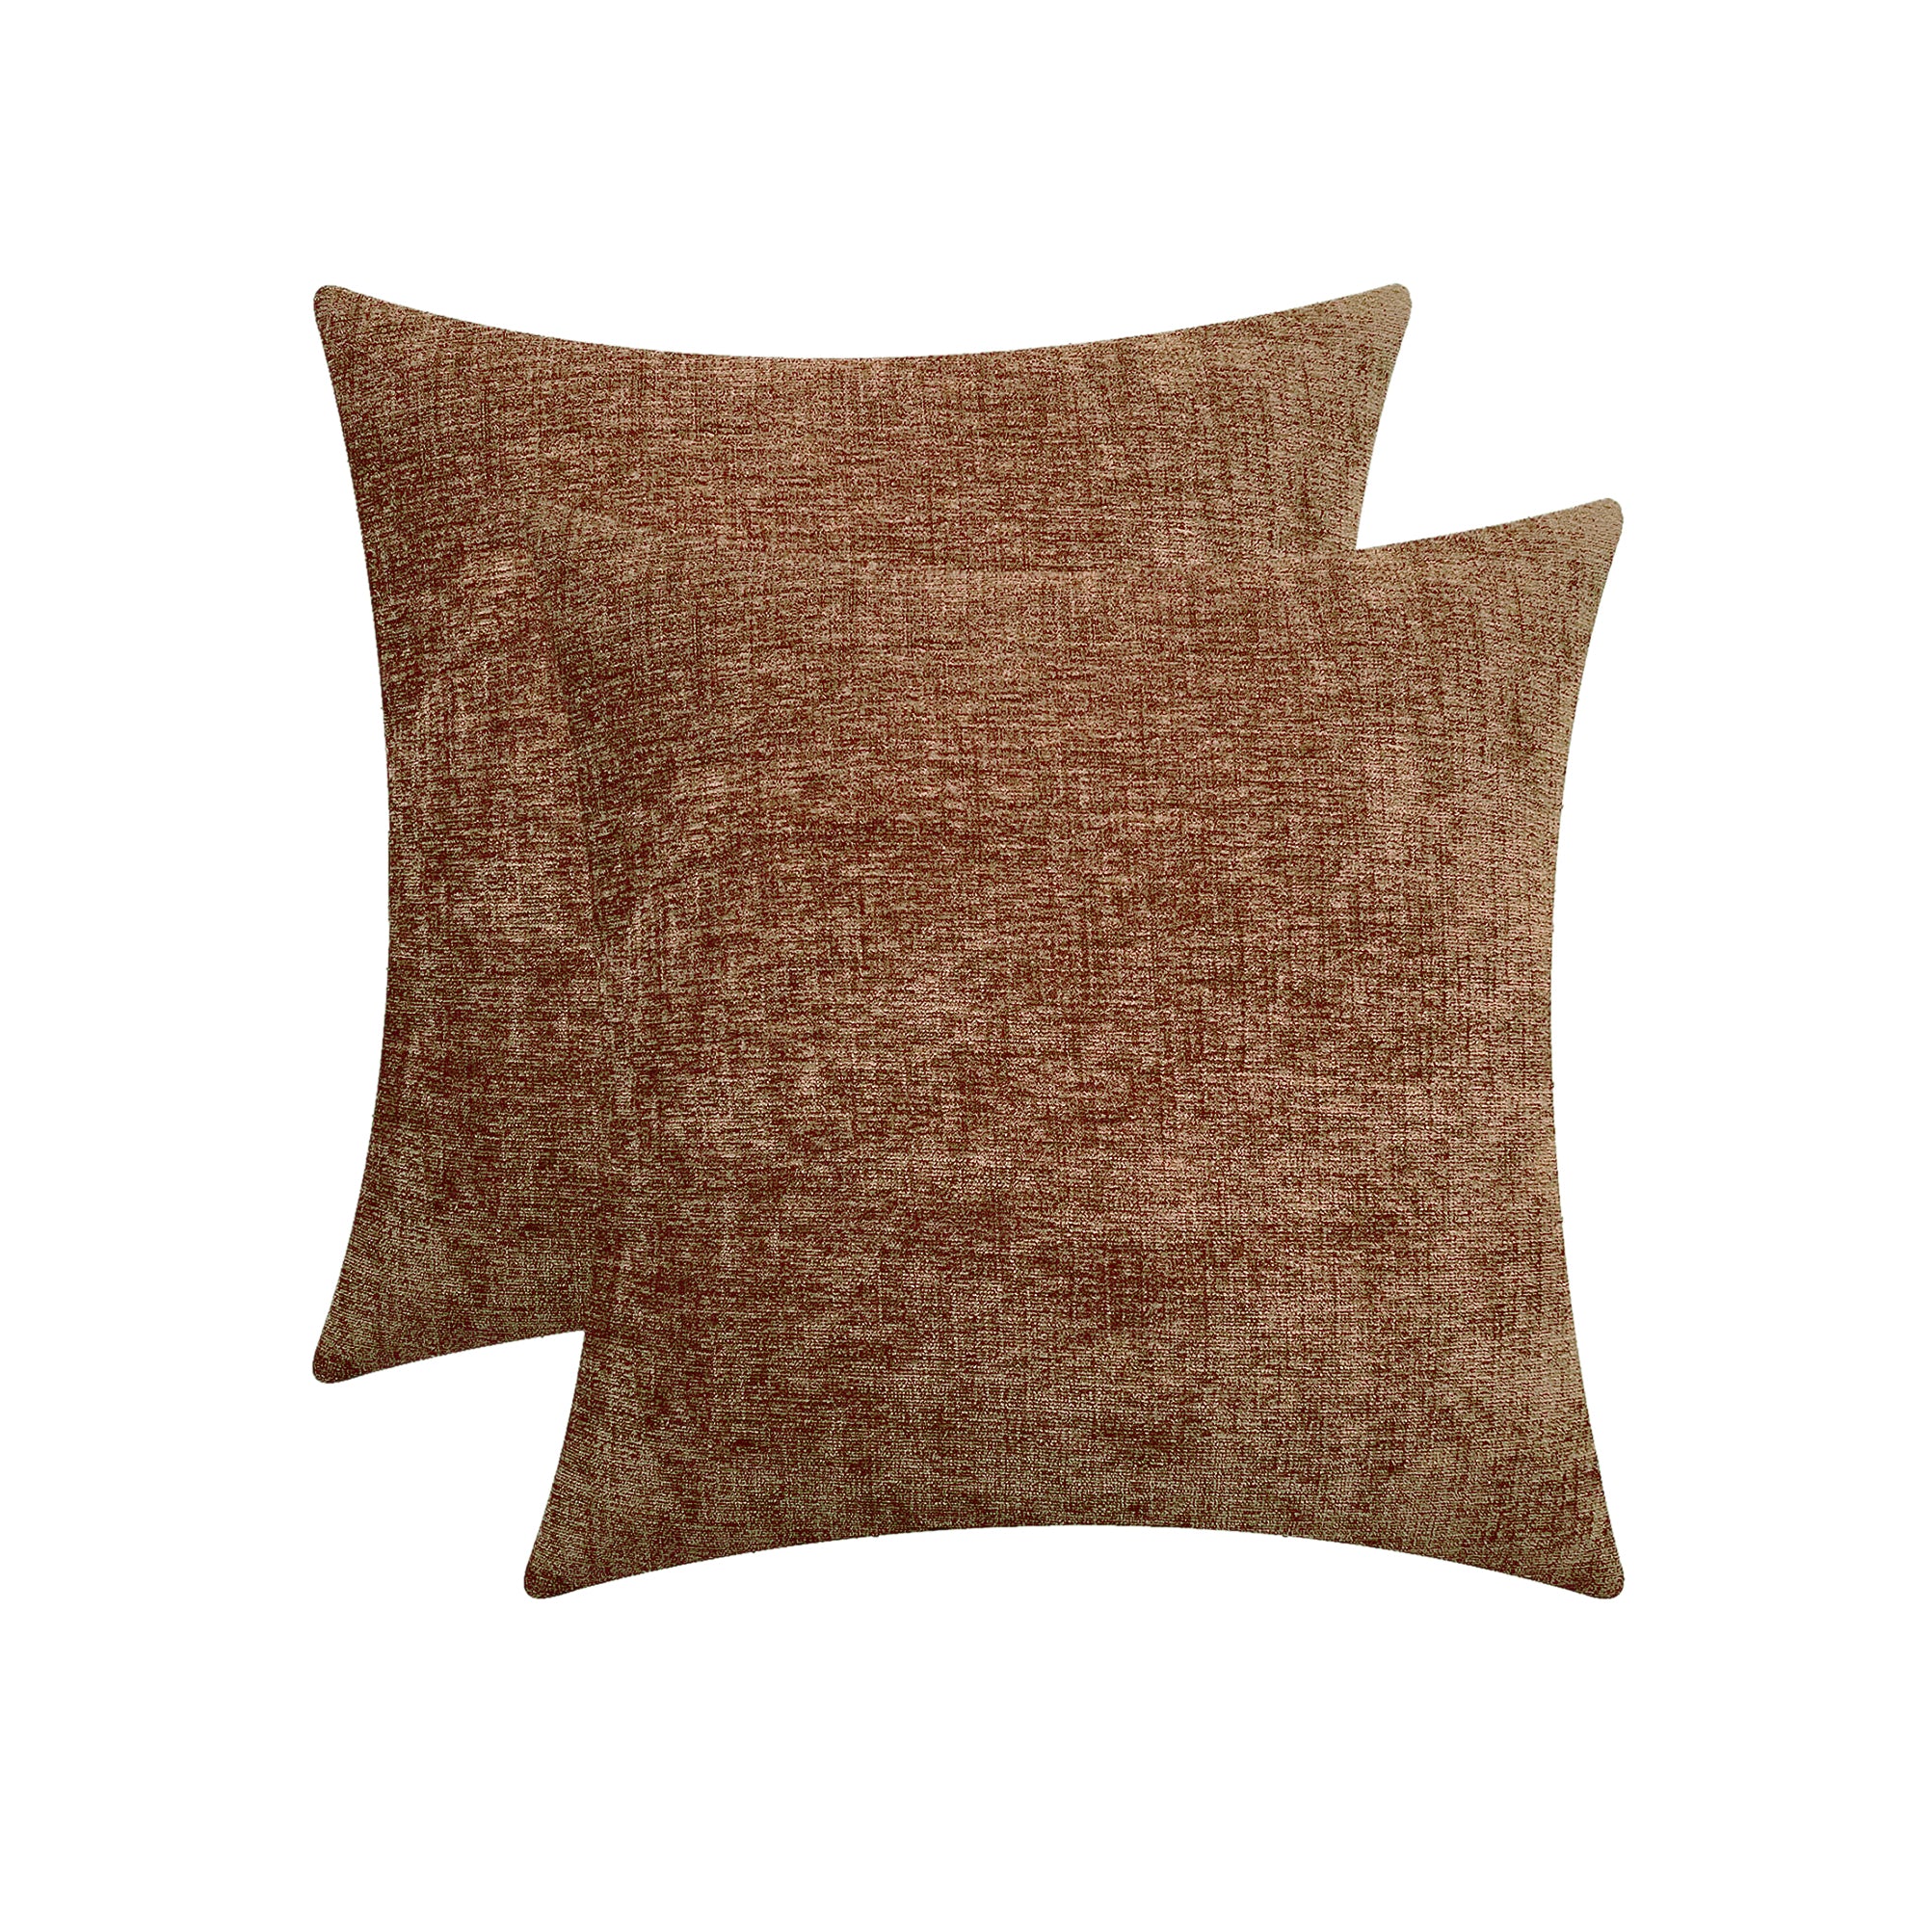 Throw Pillow Covers, Chenille couch pillow covers 18 x 18, pillow cases 18x18 Inches, Knife Edge with Invisible Zipper, 18x18 pillow cover set of 2, pillows decorative, neutral, Brown by Lushomes